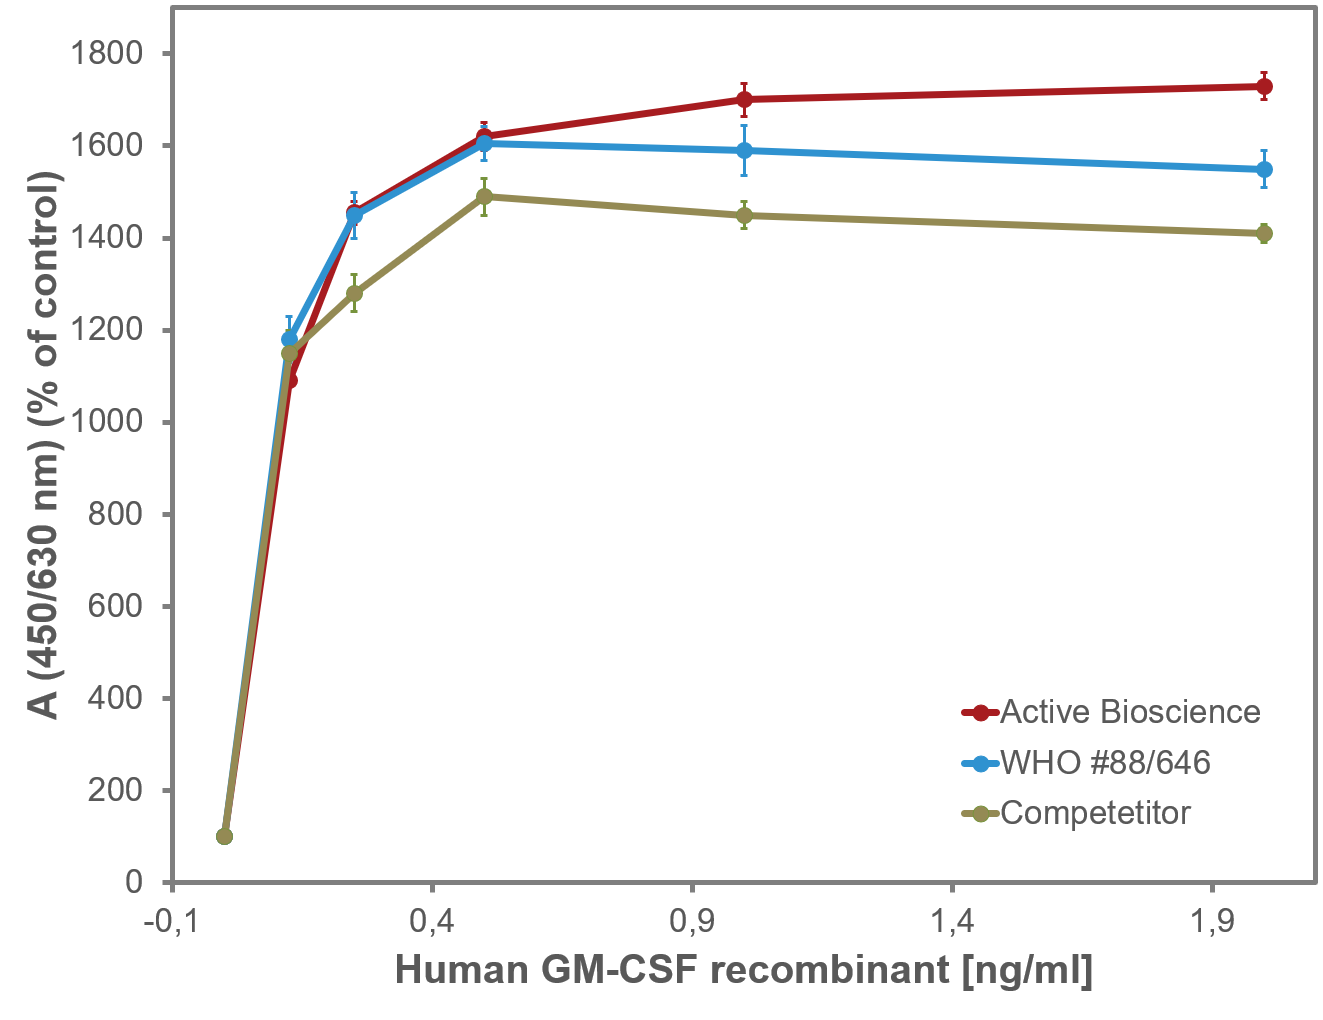 Dose-dependent stimulation of cell proliferation in TF-1 cells by recombinant human GM-CSF and the WHO standard 88/646. Values are the means (±SD) of triplicate determinations and expressed as percentage of control.